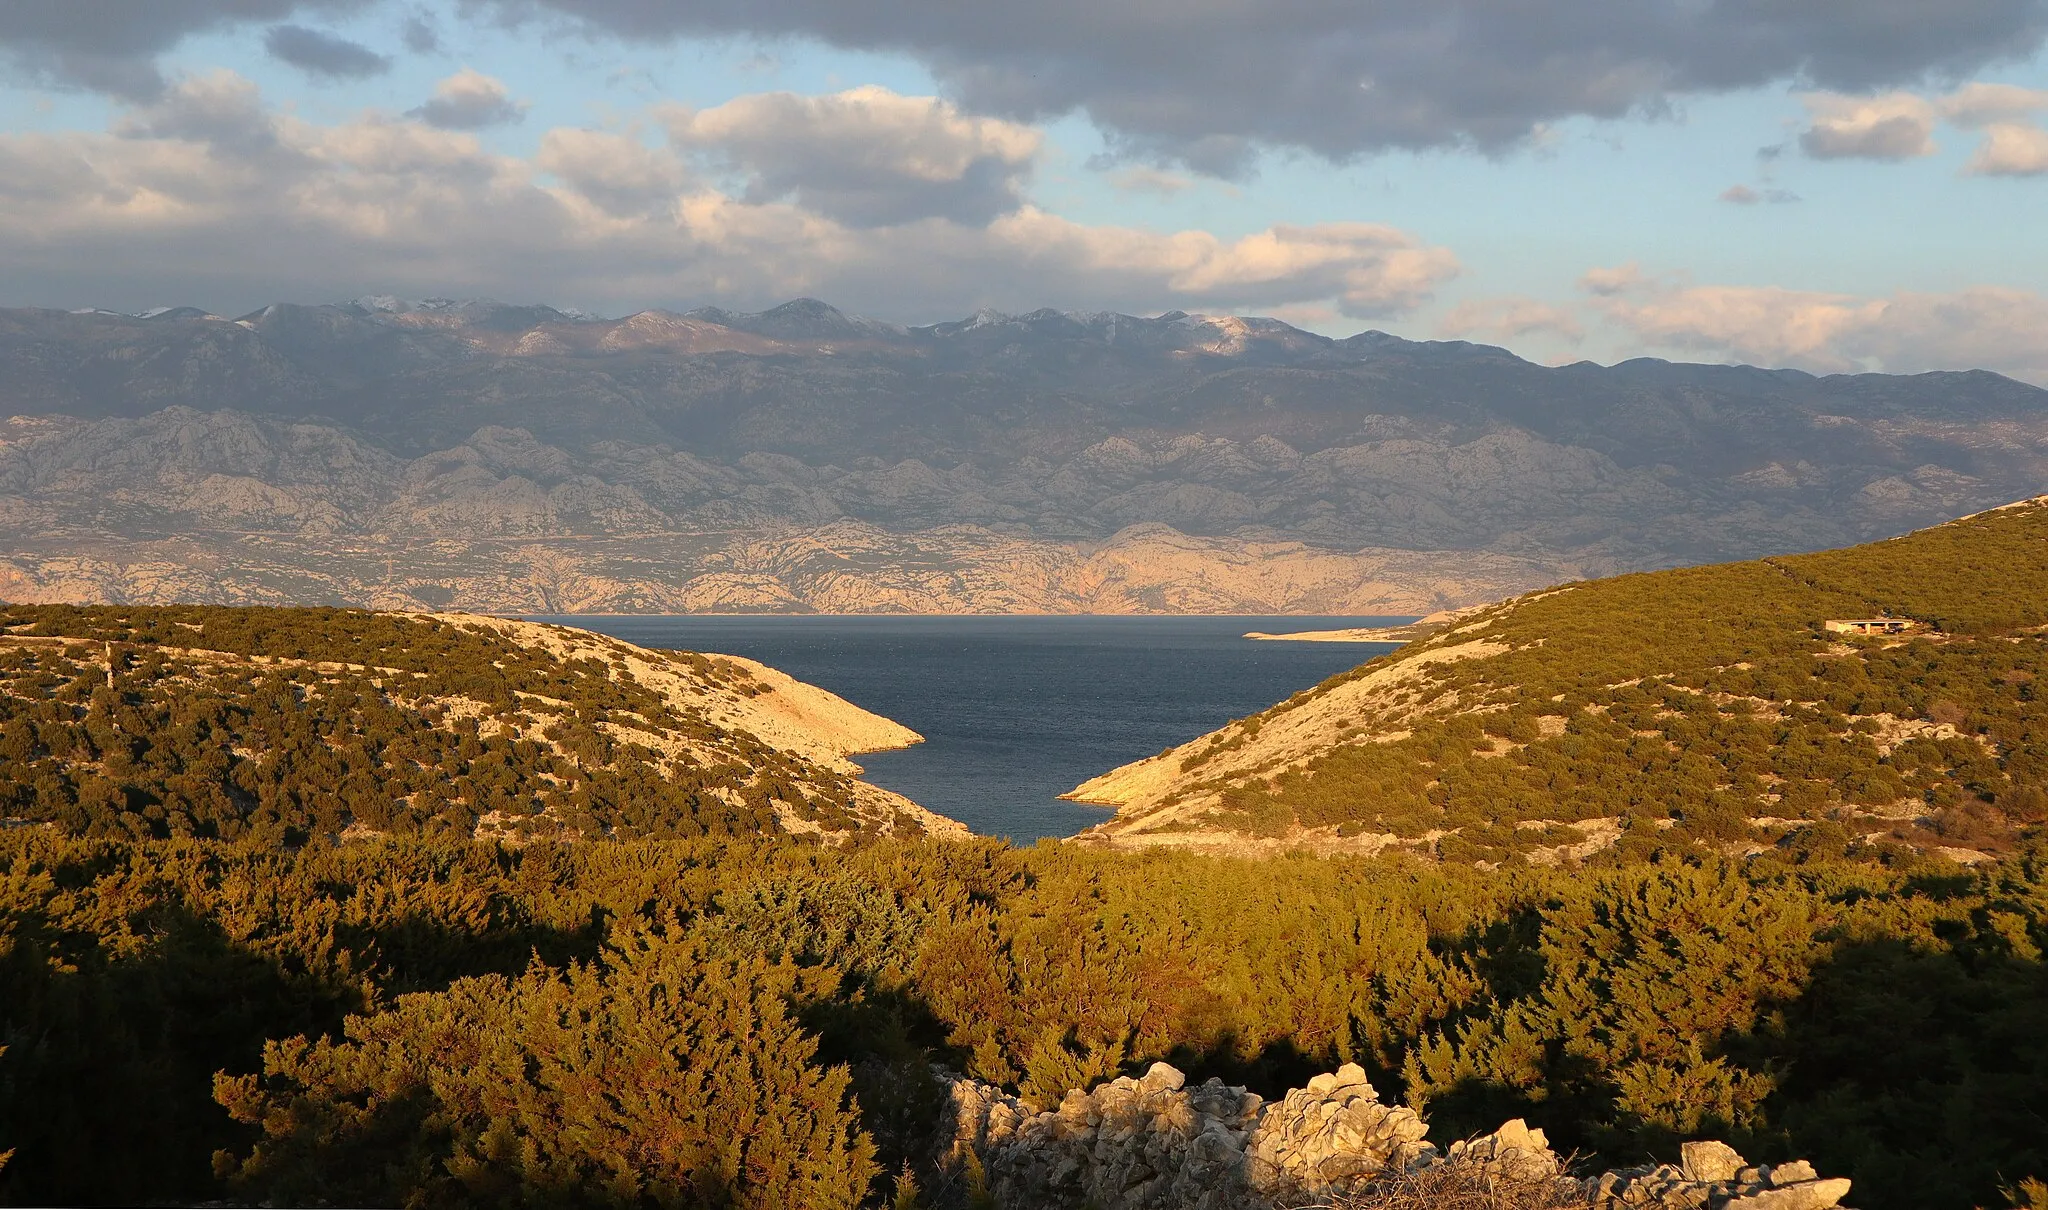 Photo showing: View of Velebit mountain range from the island of Pag, Croatia